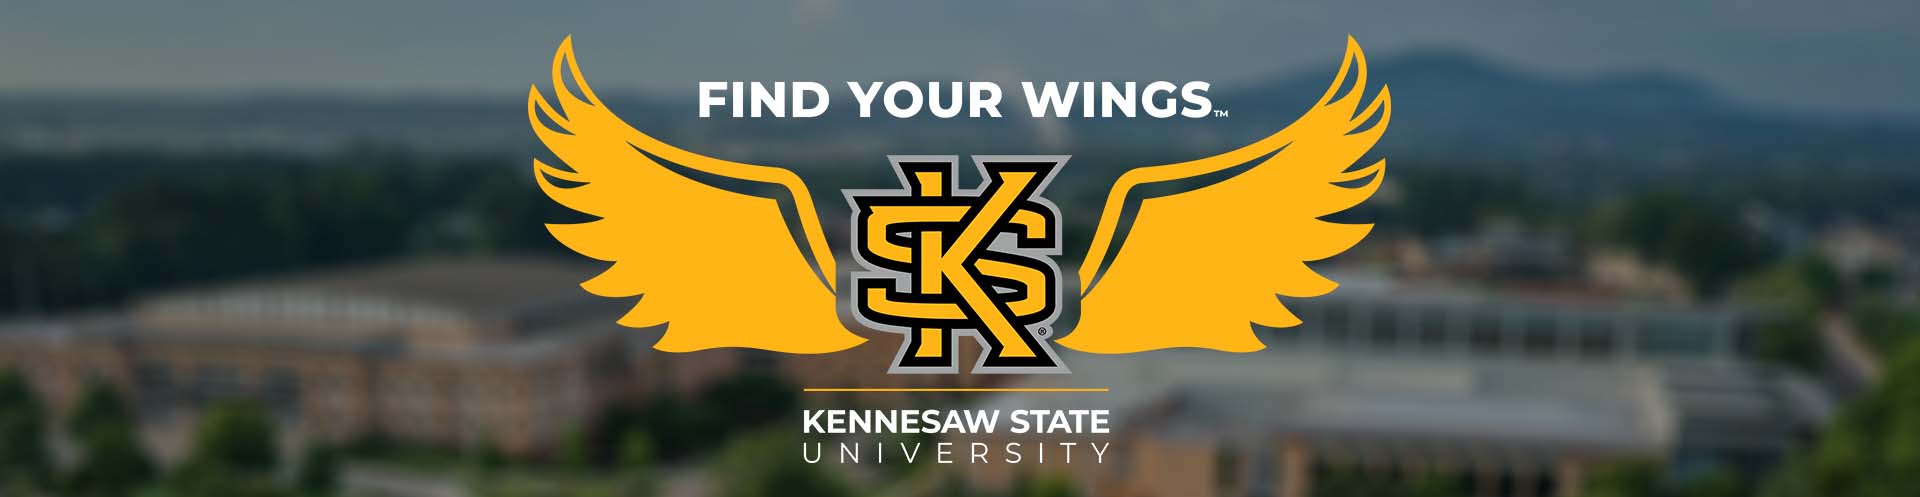 Find your wings logo